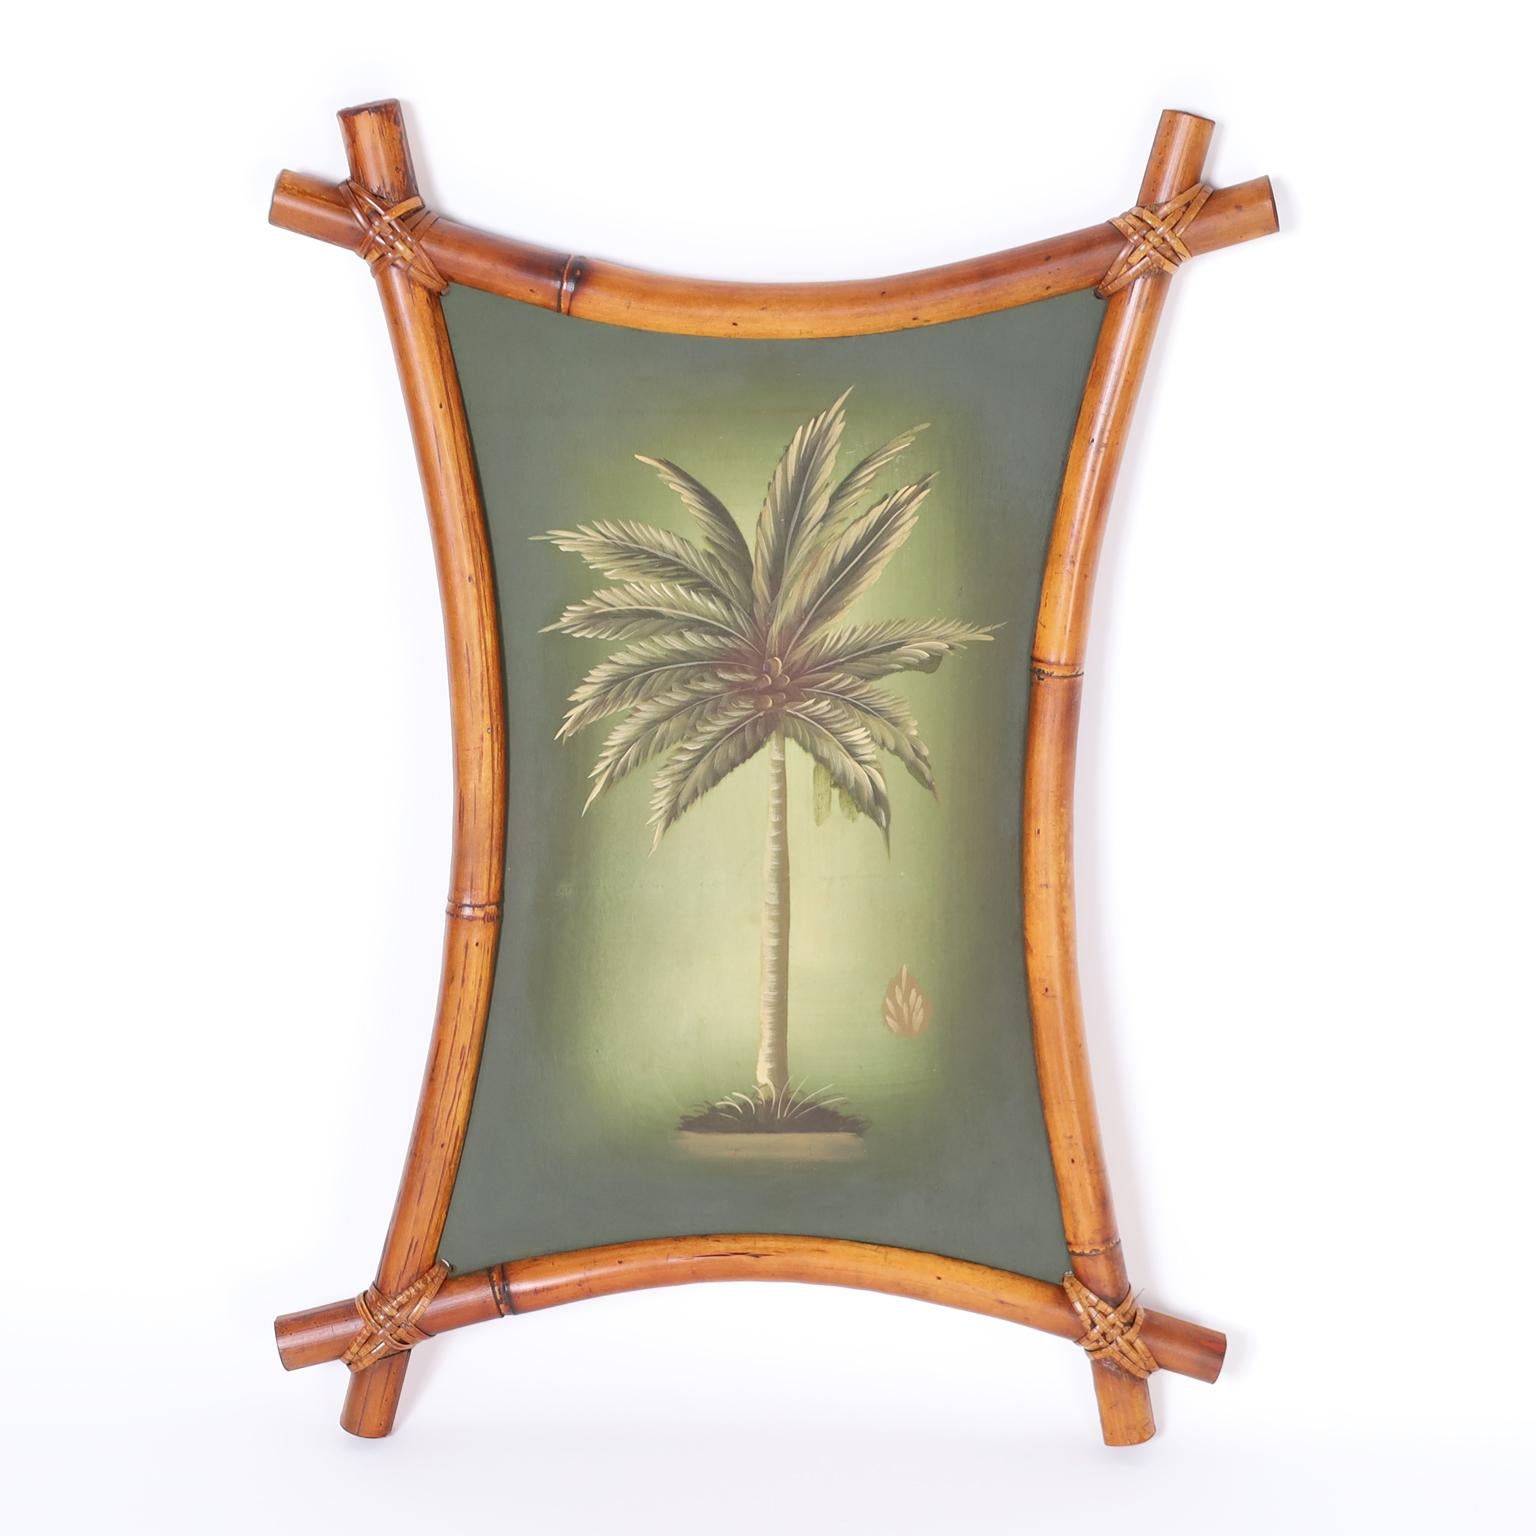 Pair of palm tree oil paintings on board presented in bent bamboo frames with reed wrapped corners.